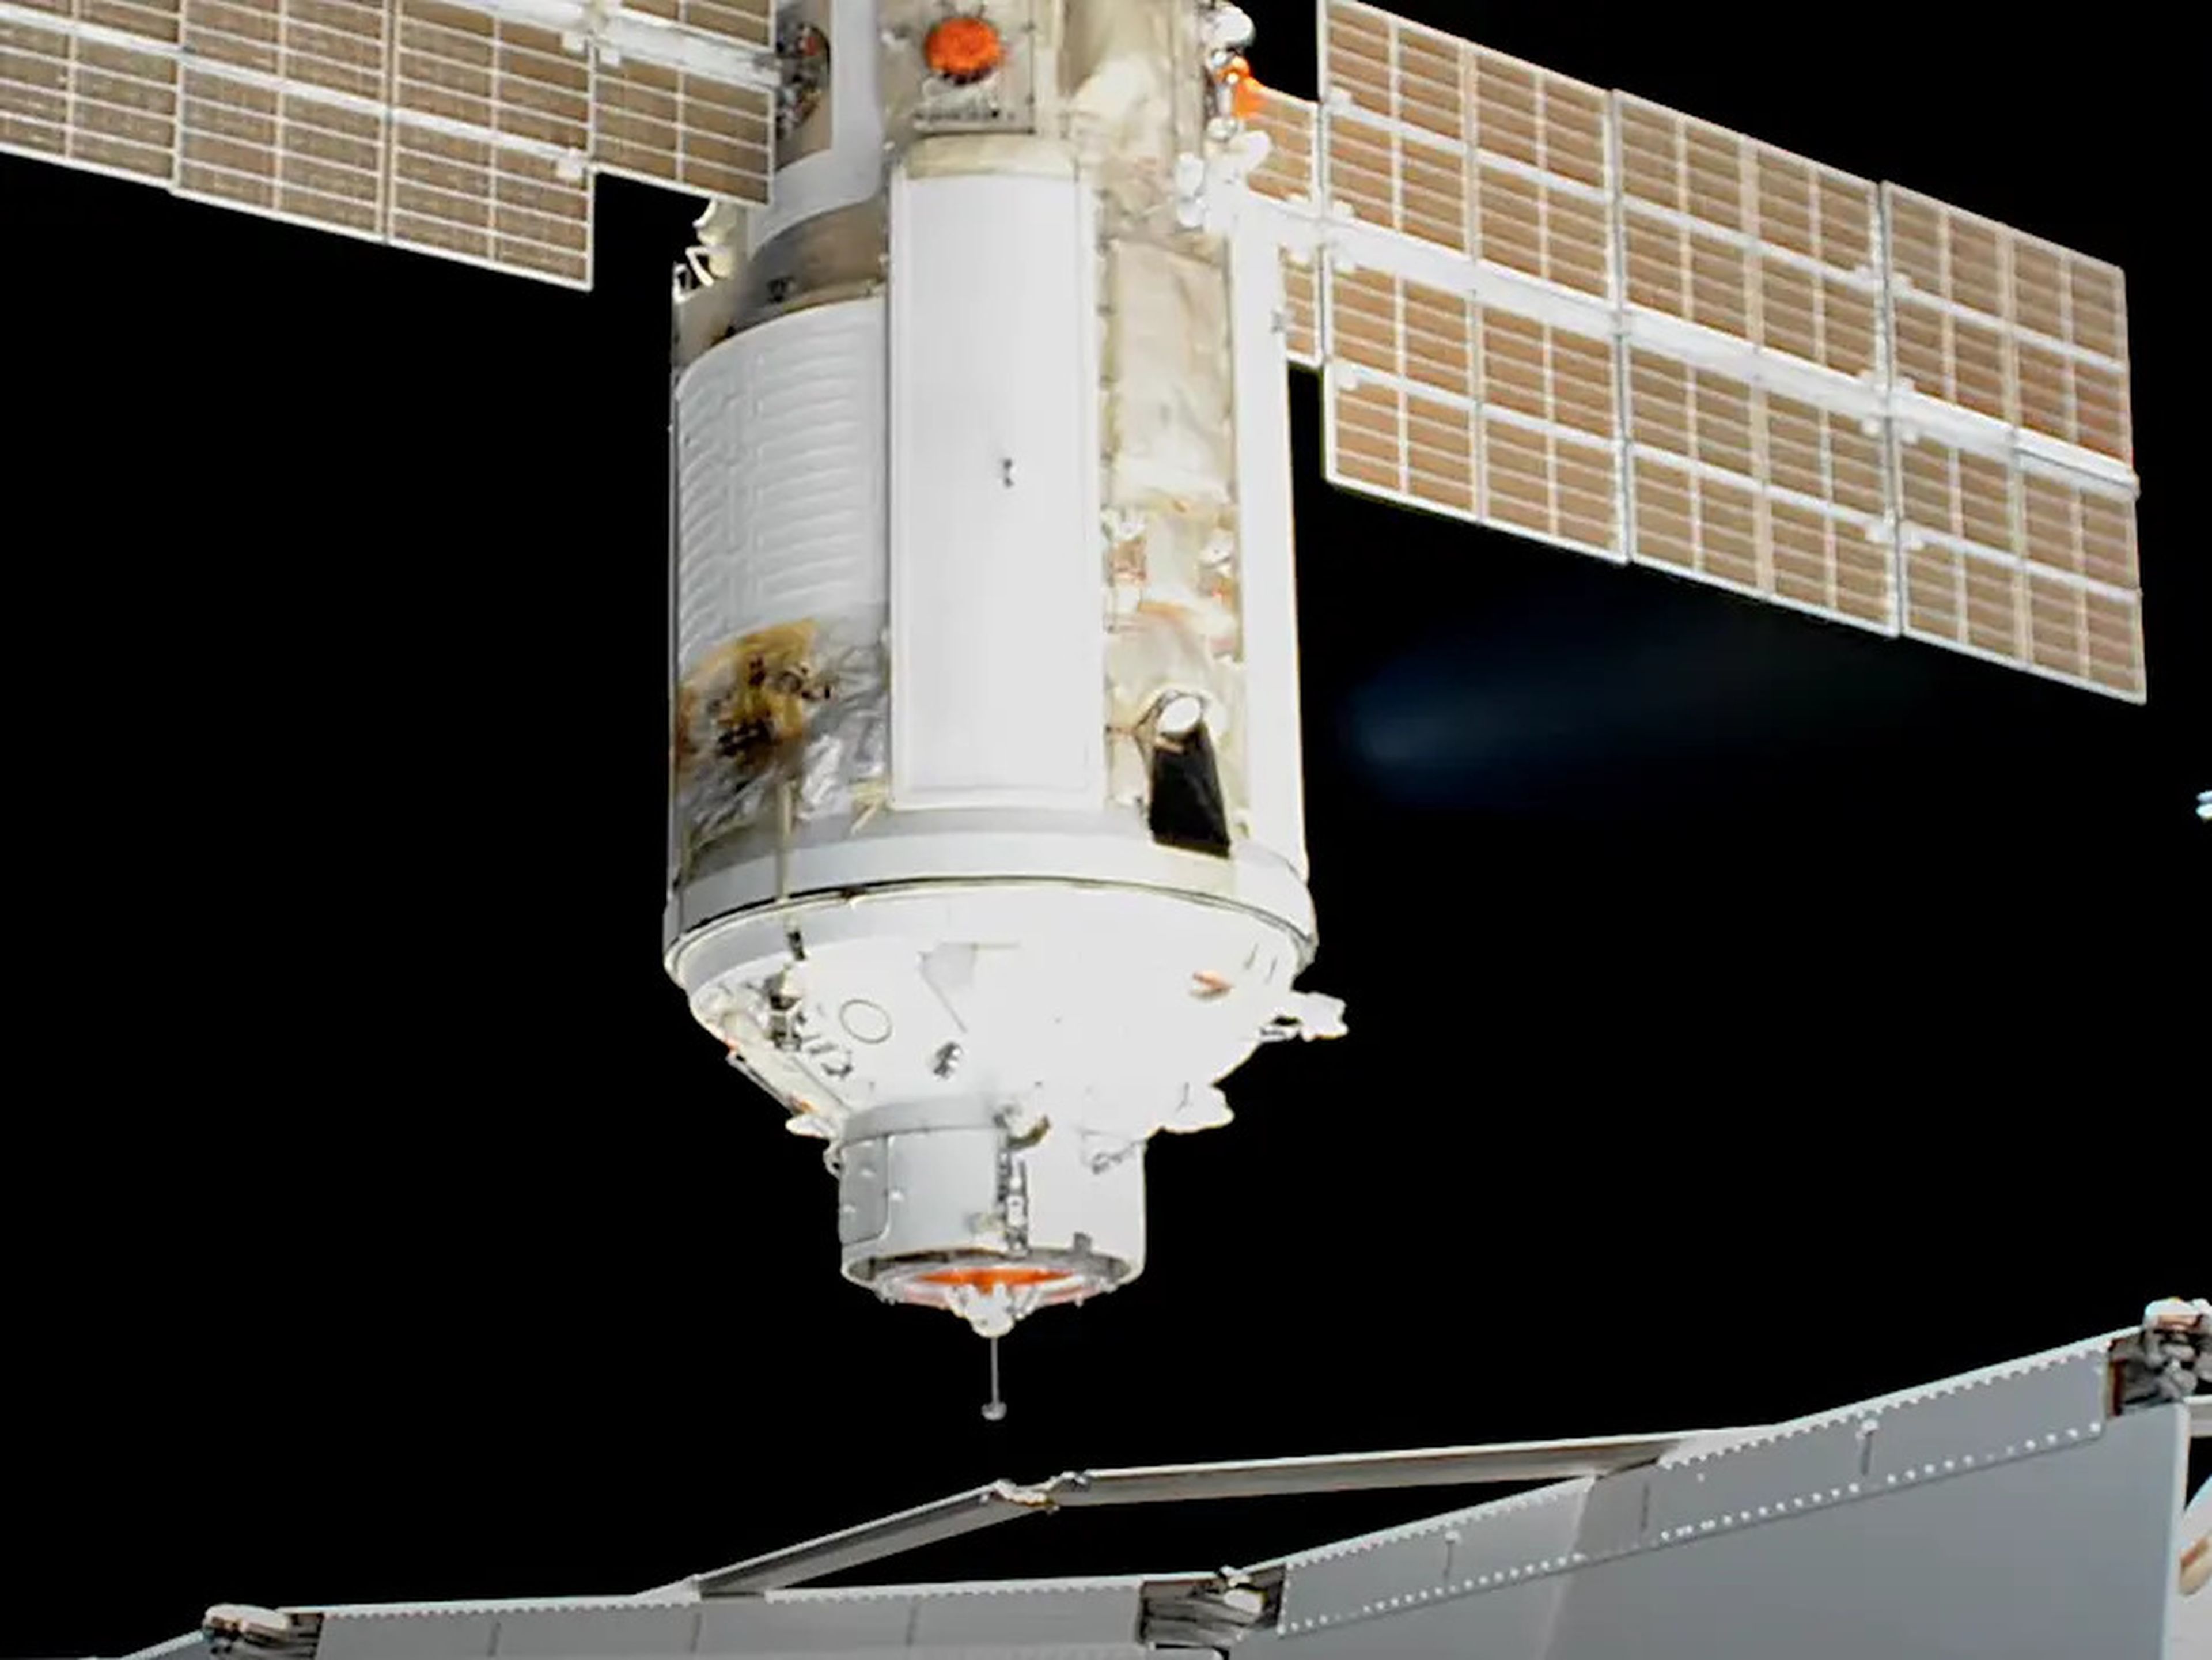 nauka module spaceship with solar array wings approaches international space station